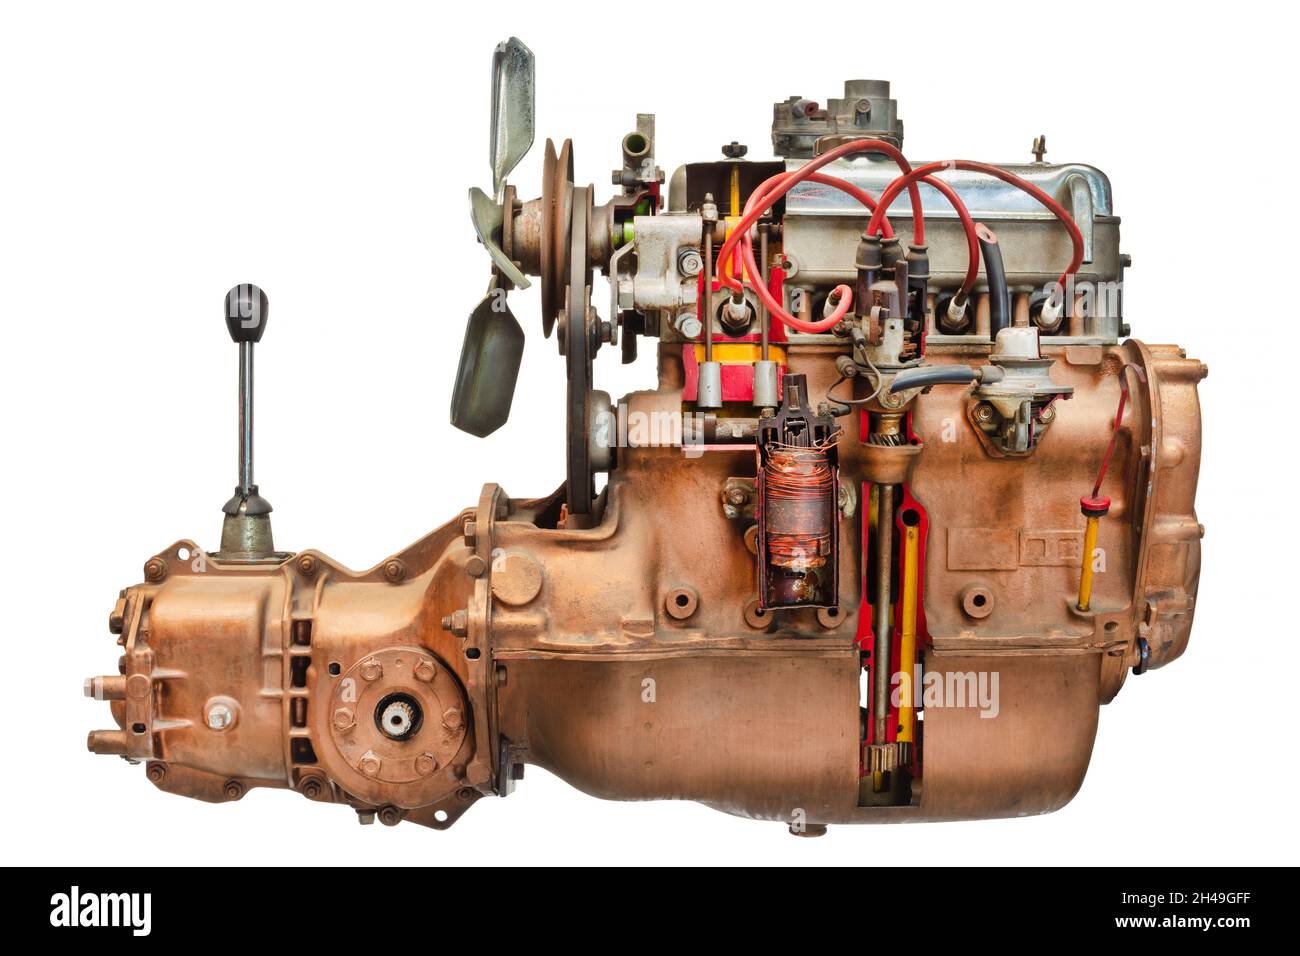 Side view of a disassembled vintage car engine with transmission and gear shift isolated on a white background Stock Photo